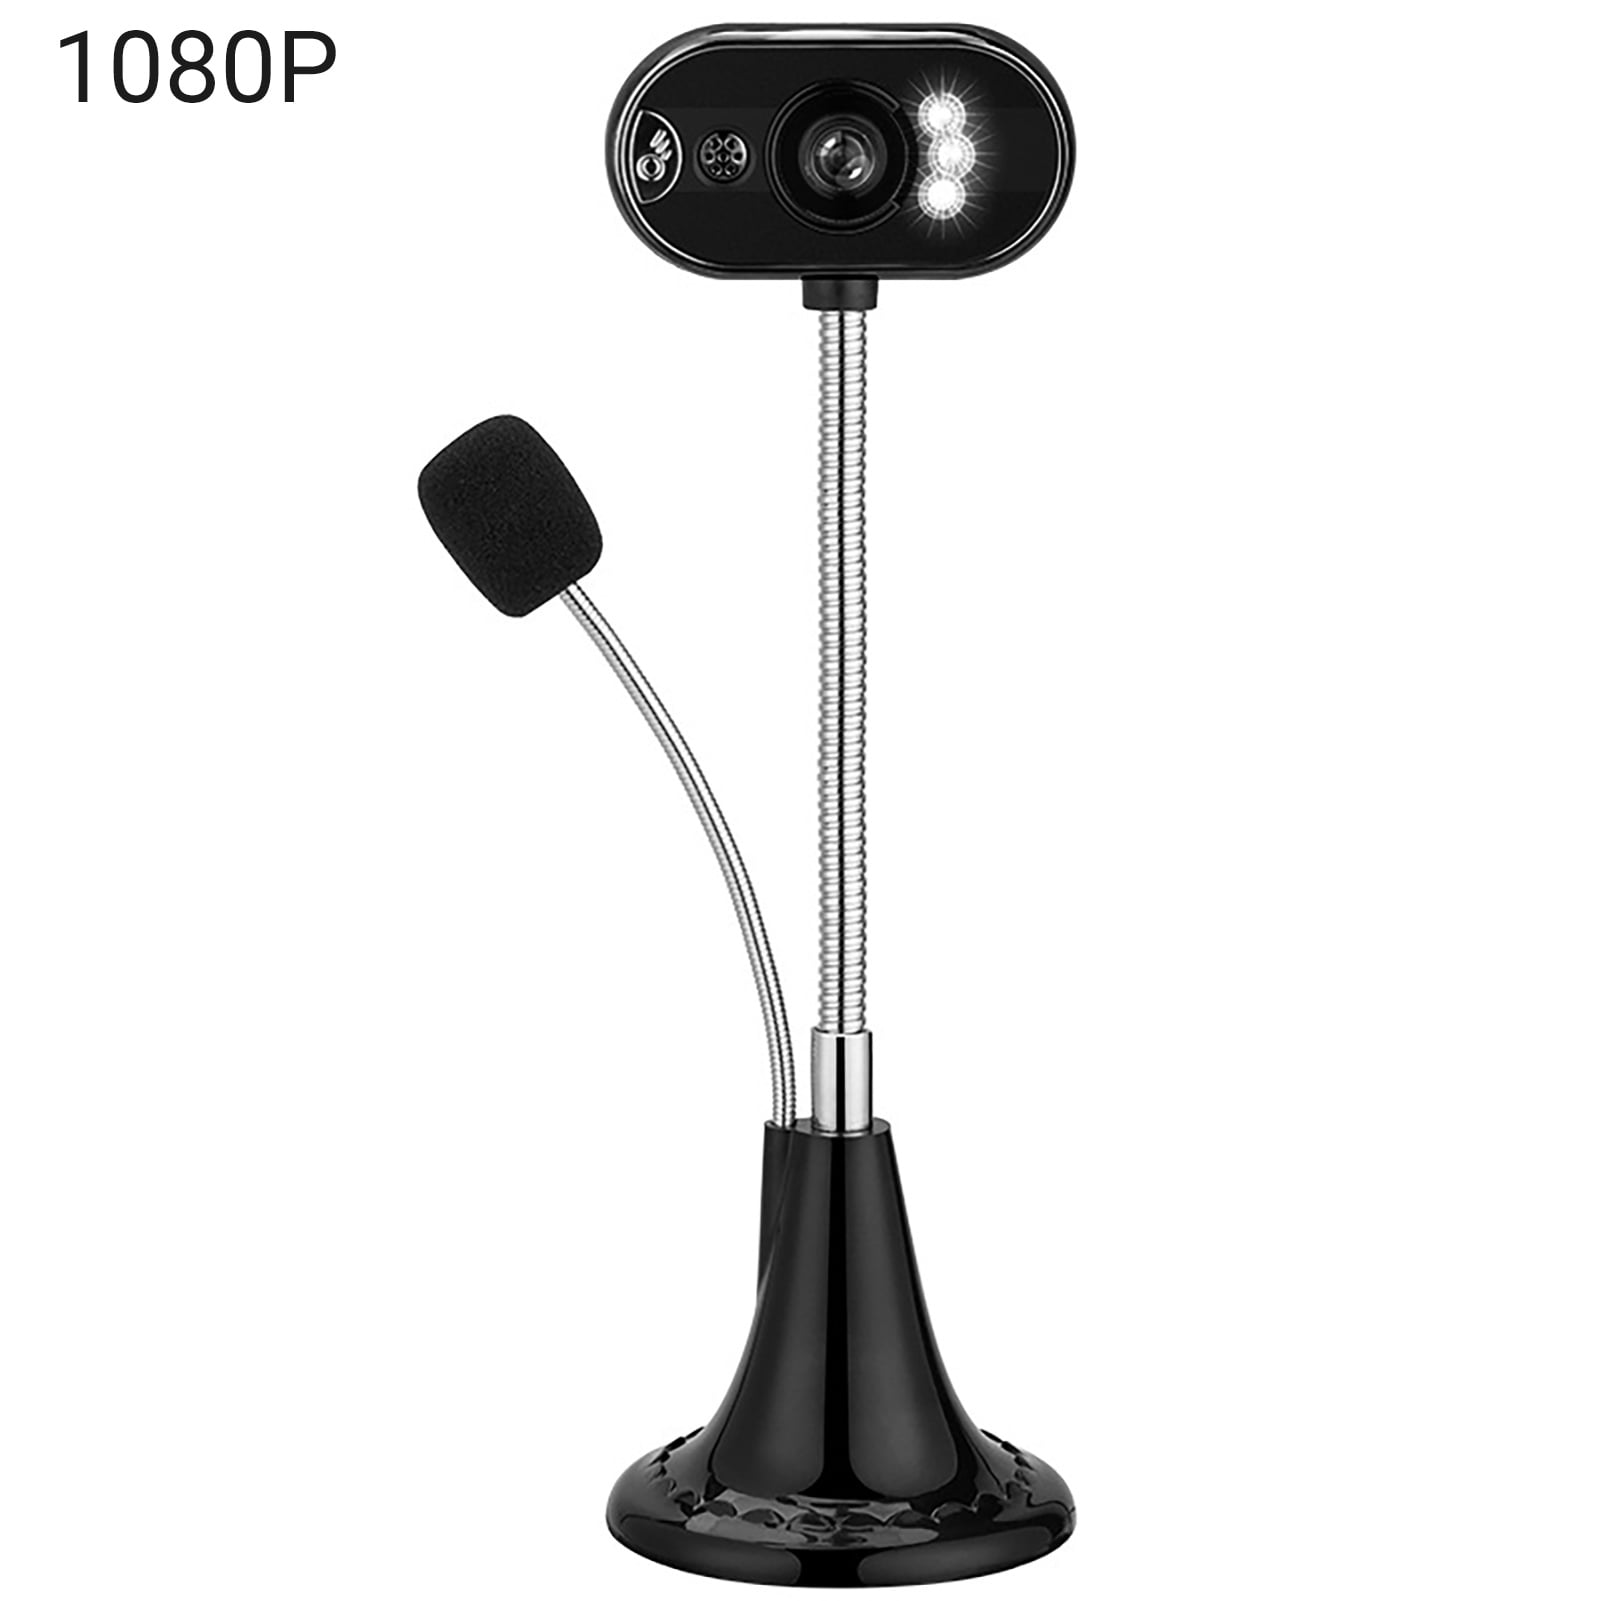 LIWEN Web Camera Night Vision Beauty Effect High Clarity 720P/1080P USB Webcam with Microphone for Live Streaming